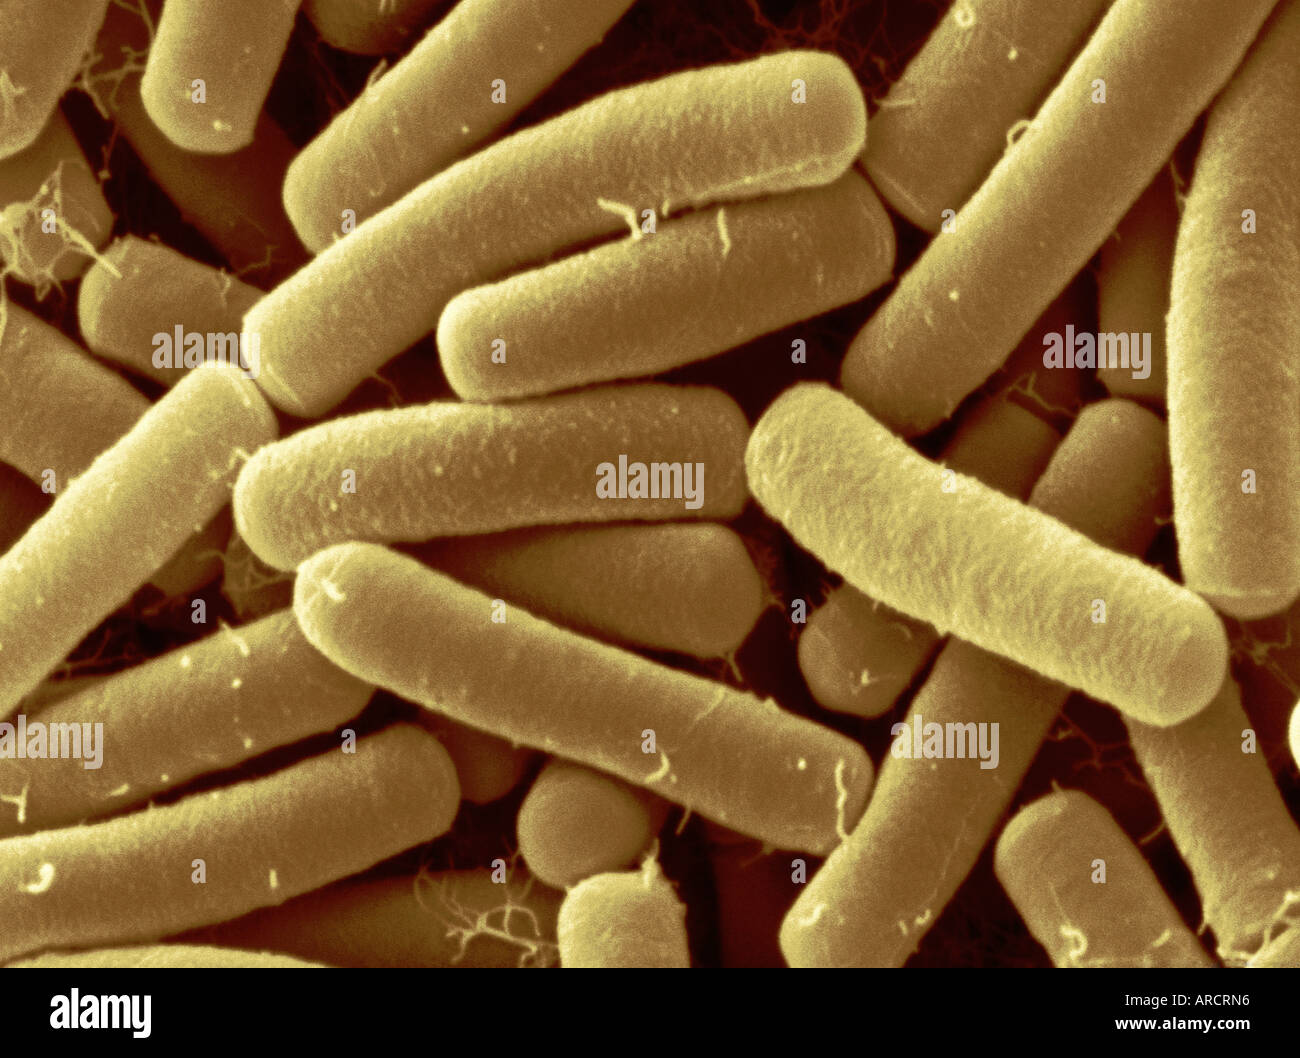 Bacillus thuringiensis (Bt) is shown here as smooth bacterial